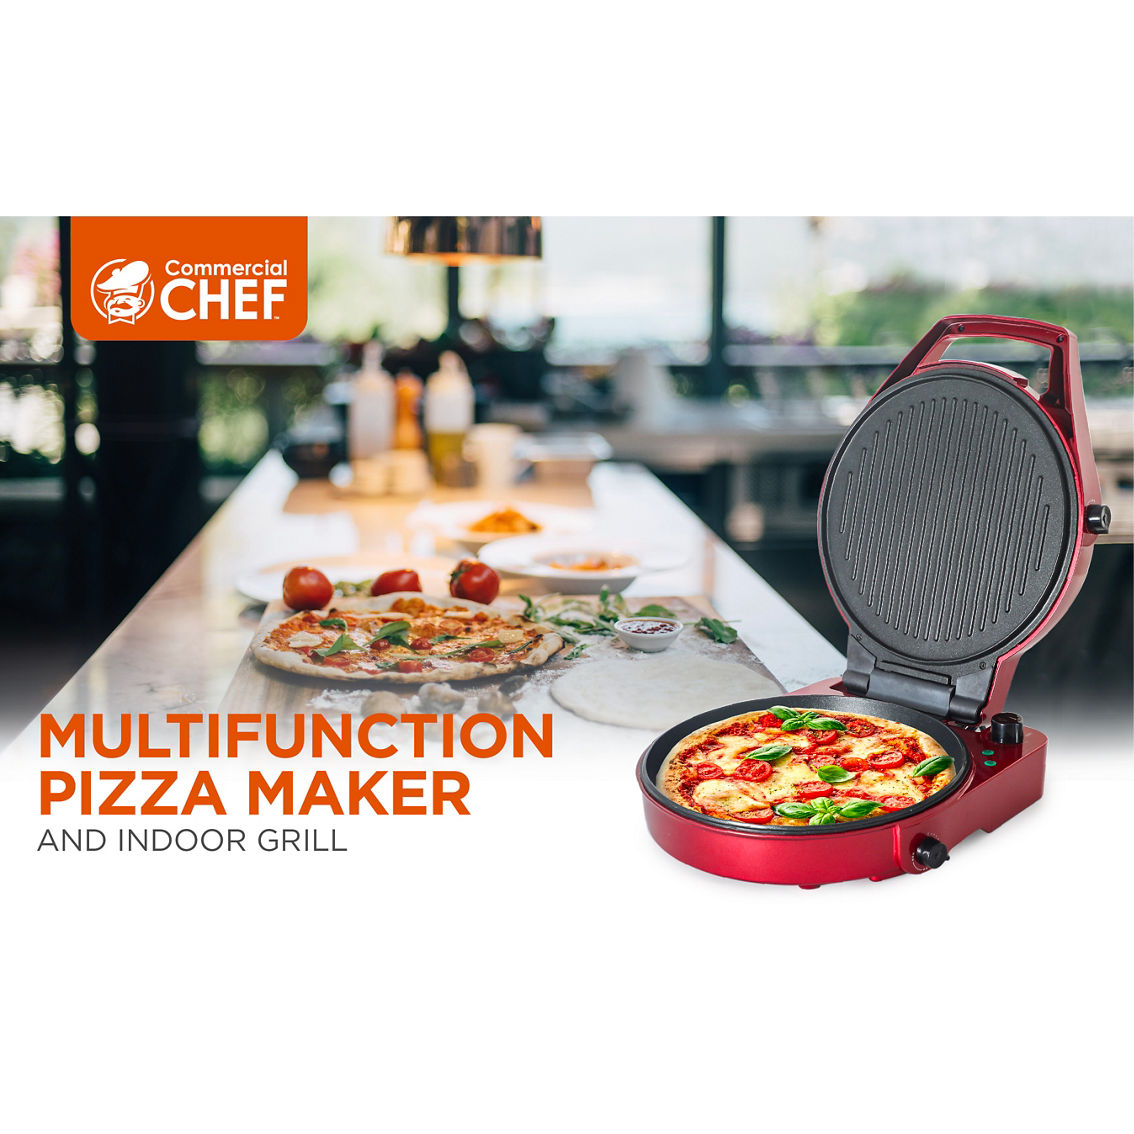 Commercial Chef Multifunction Pizza Maker and Indoor Grill - Image 7 of 9